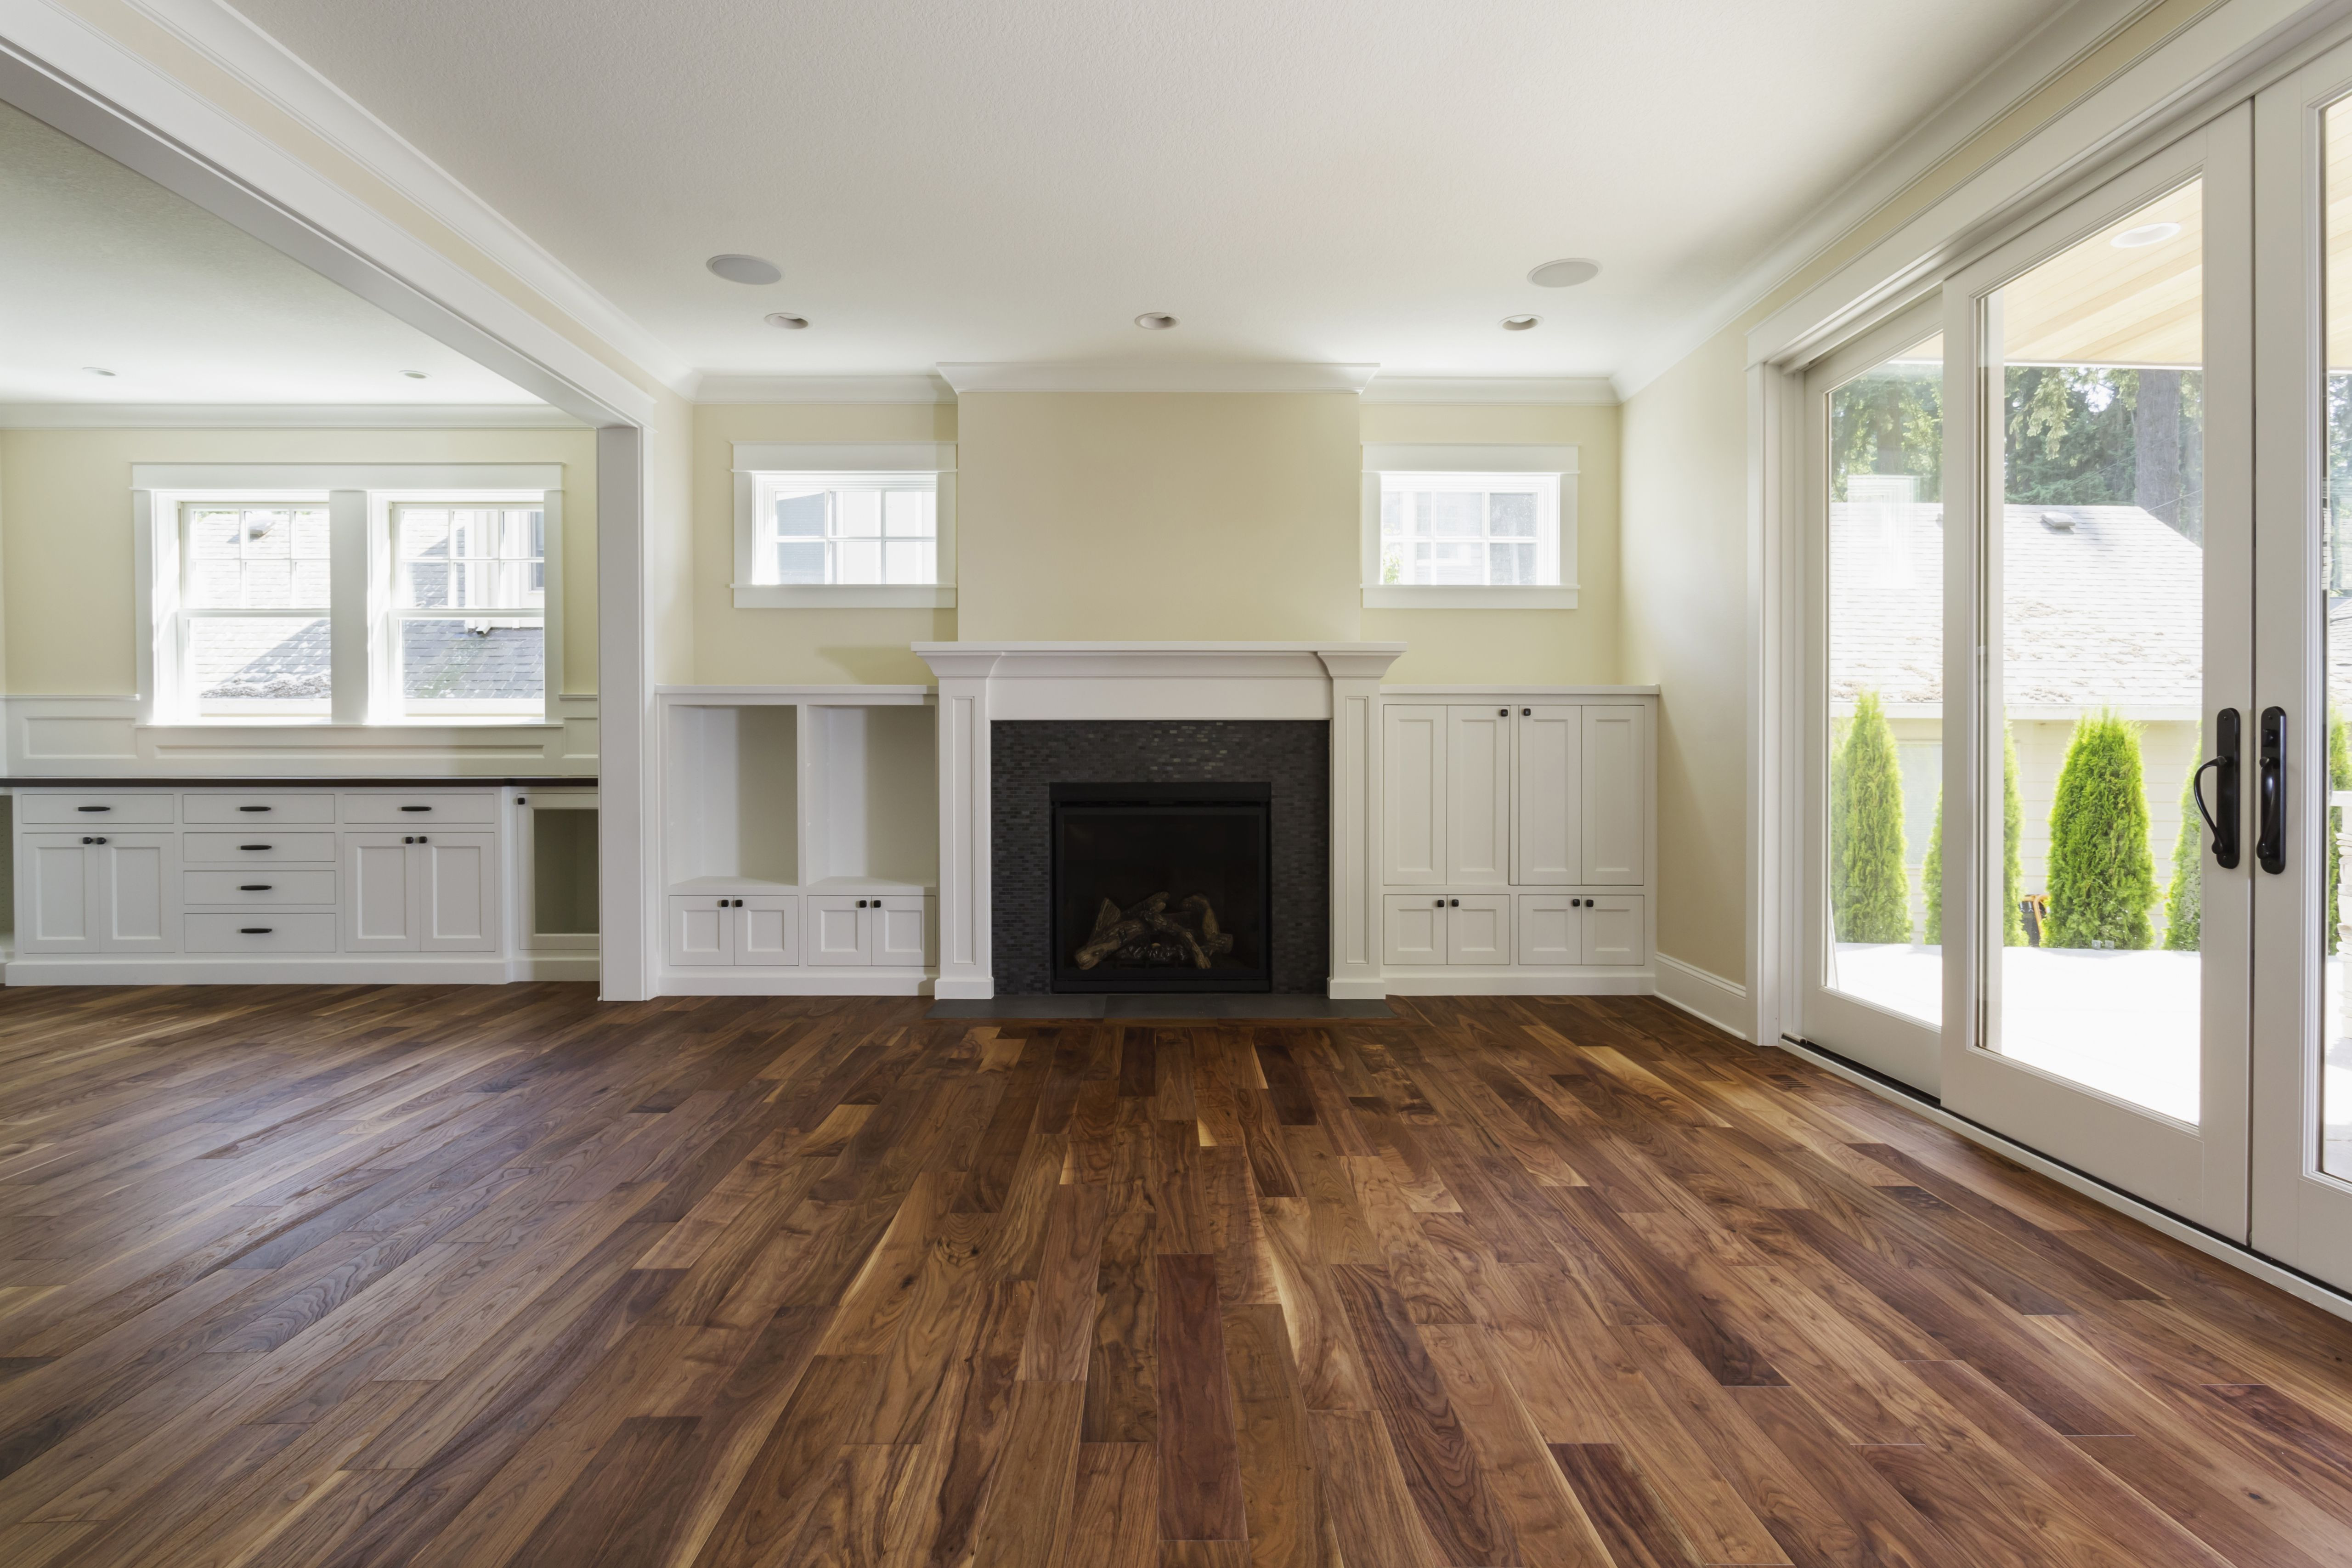 Top Quality Engineered Hardwood Flooring Of the Pros and Cons Of Prefinished Hardwood Flooring Throughout Fireplace and Built In Shelves In Living Room 482143011 57bef8e33df78cc16e035397